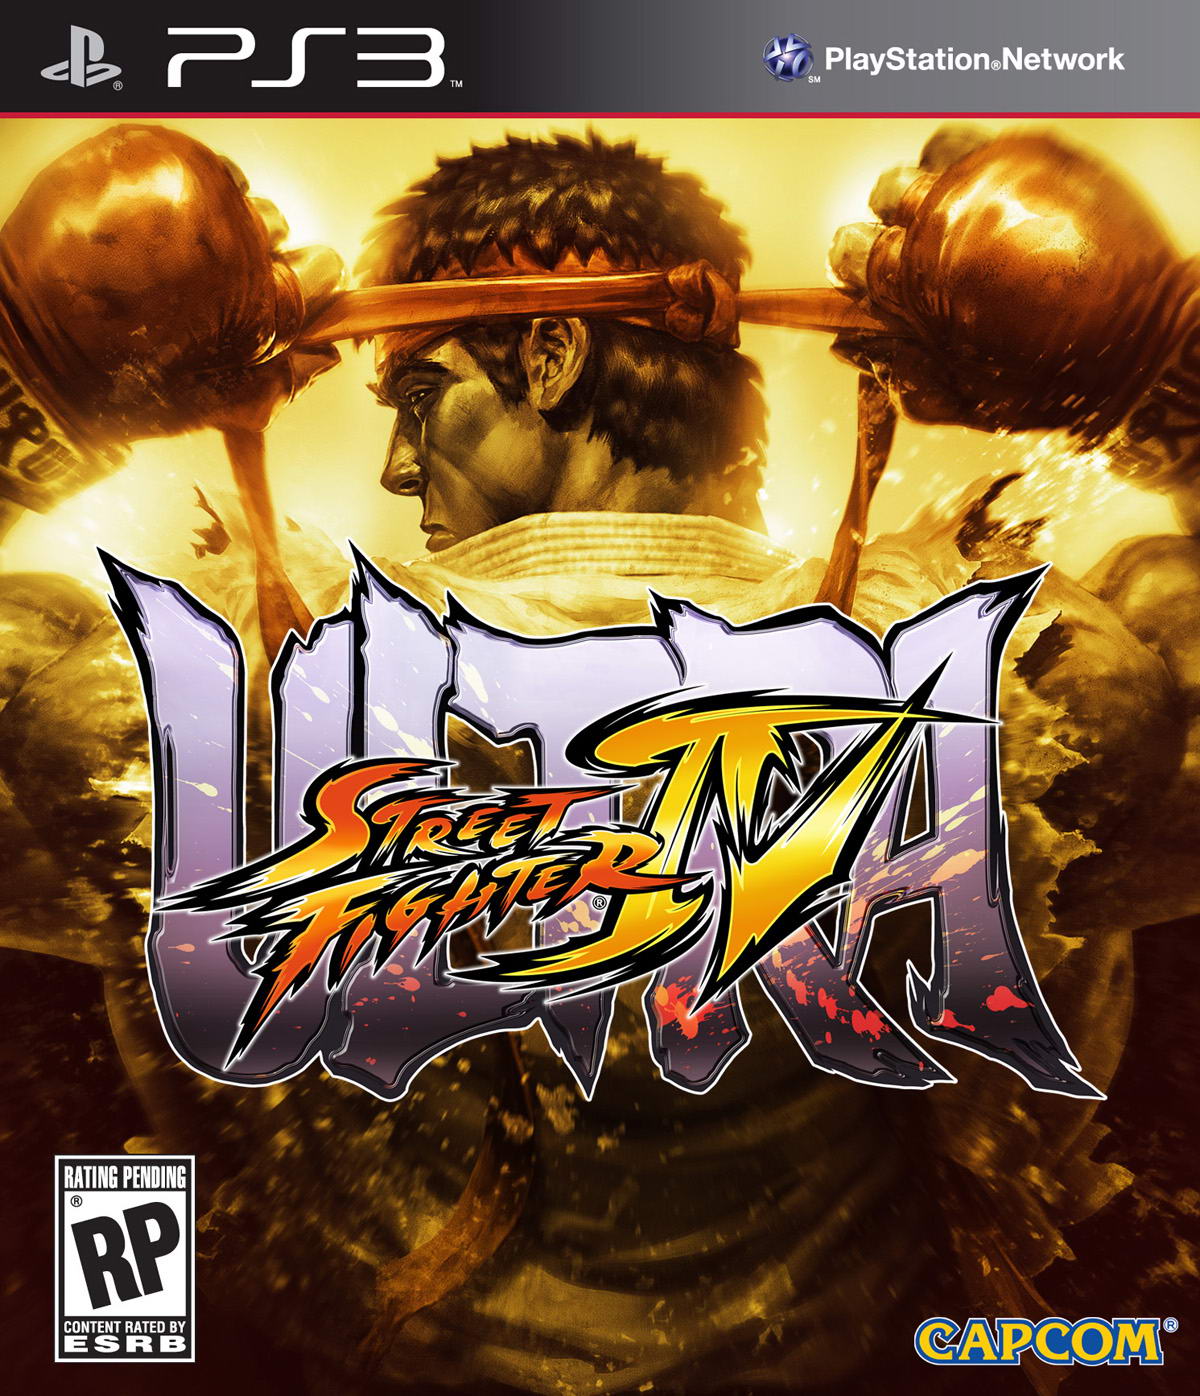 PS3 Ultra Street Fighter IV